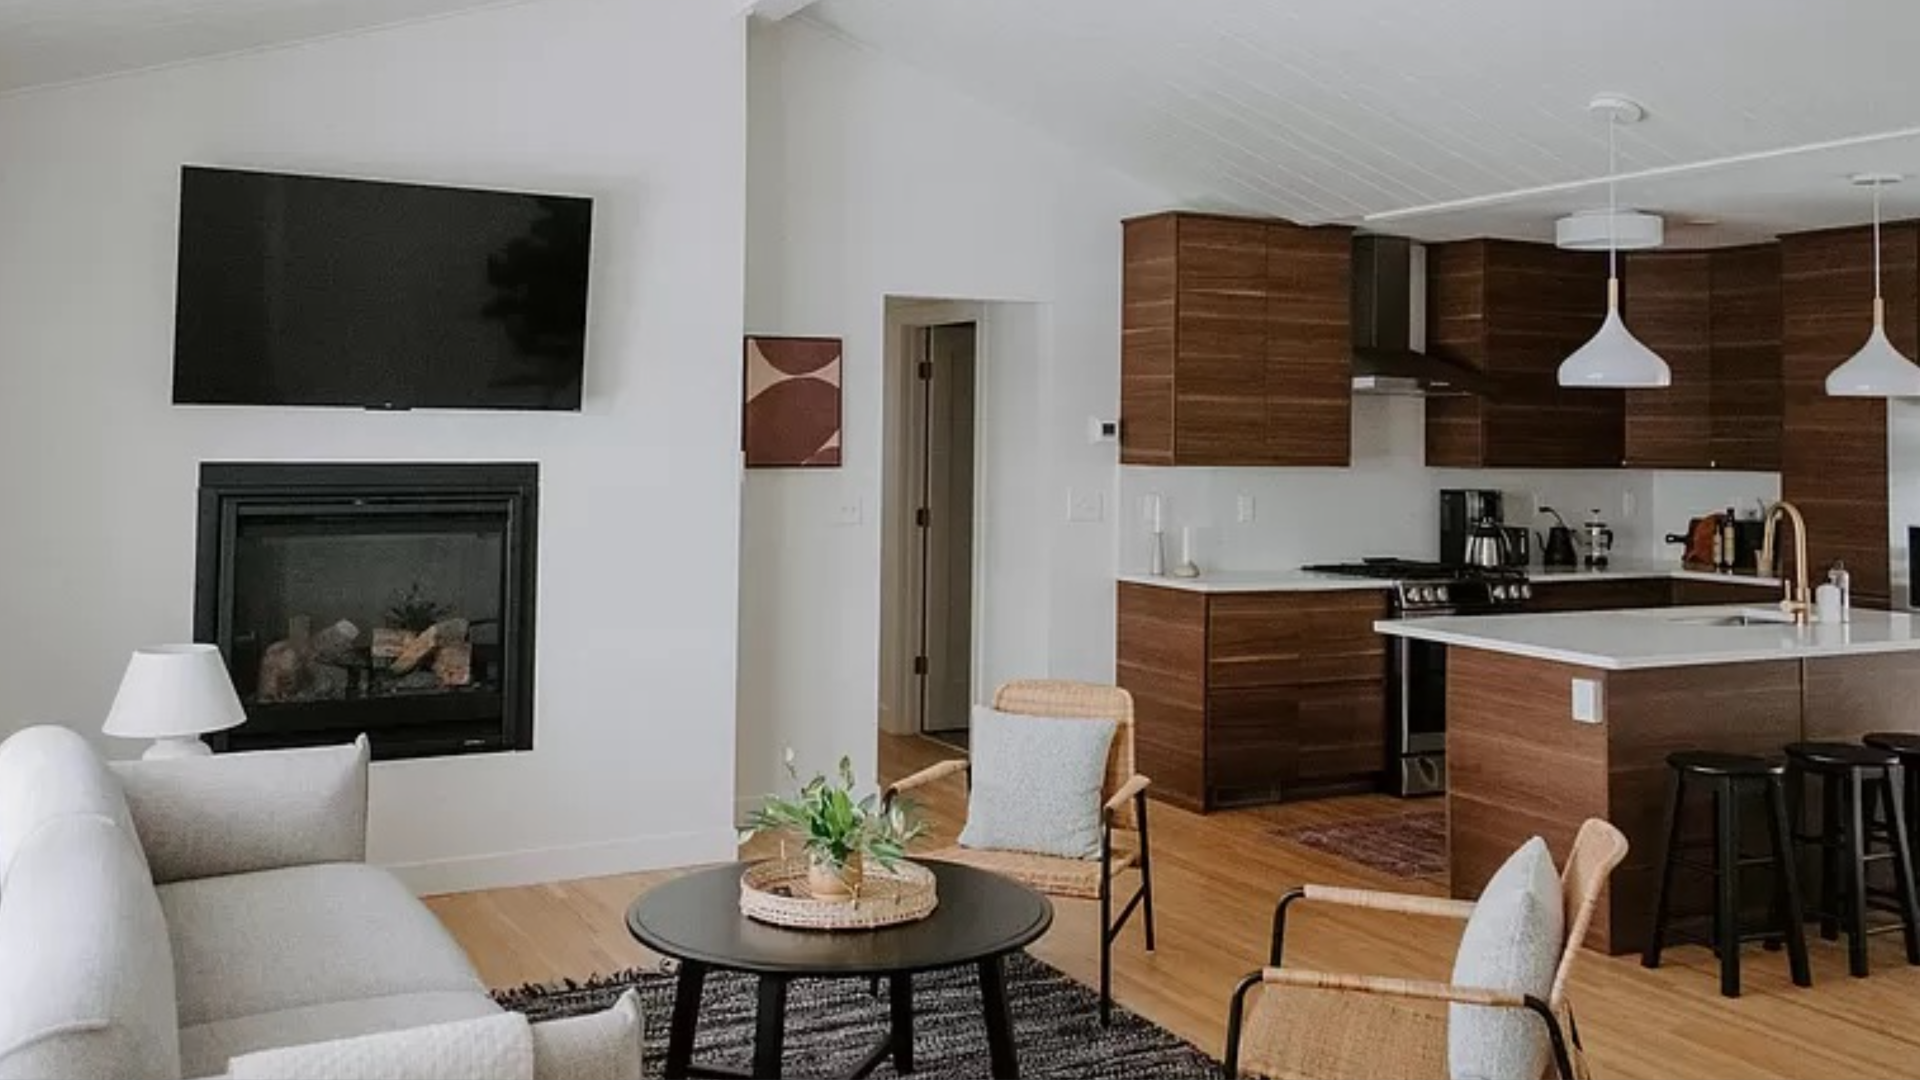 A living room with white walls and brown cabinets in the kitchen.